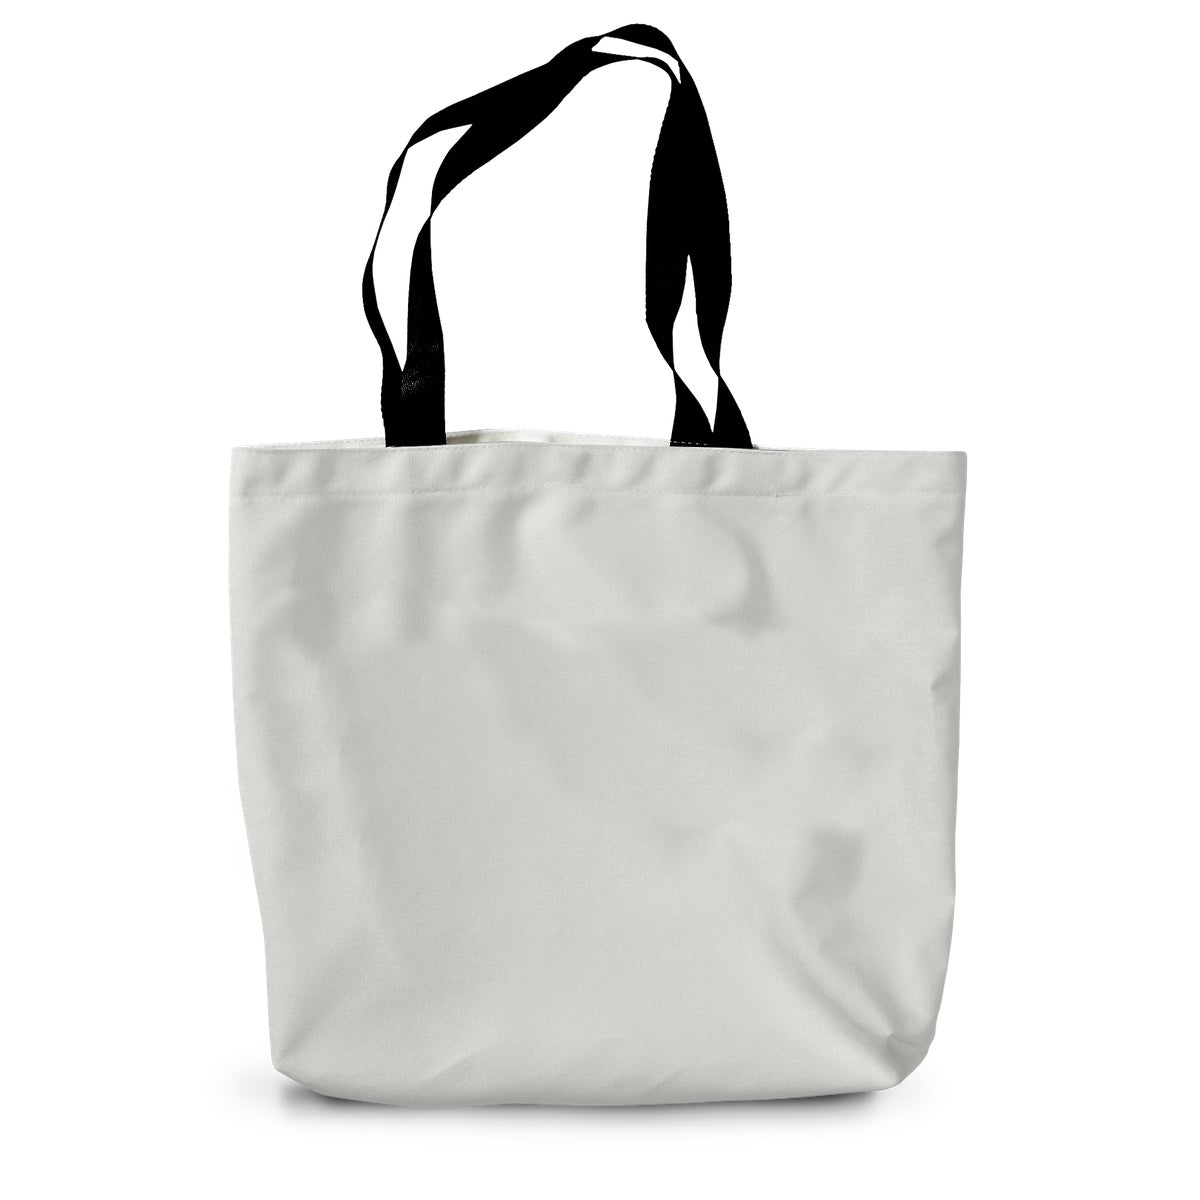 Vibrant Flow Girl Canvas Tote Bag